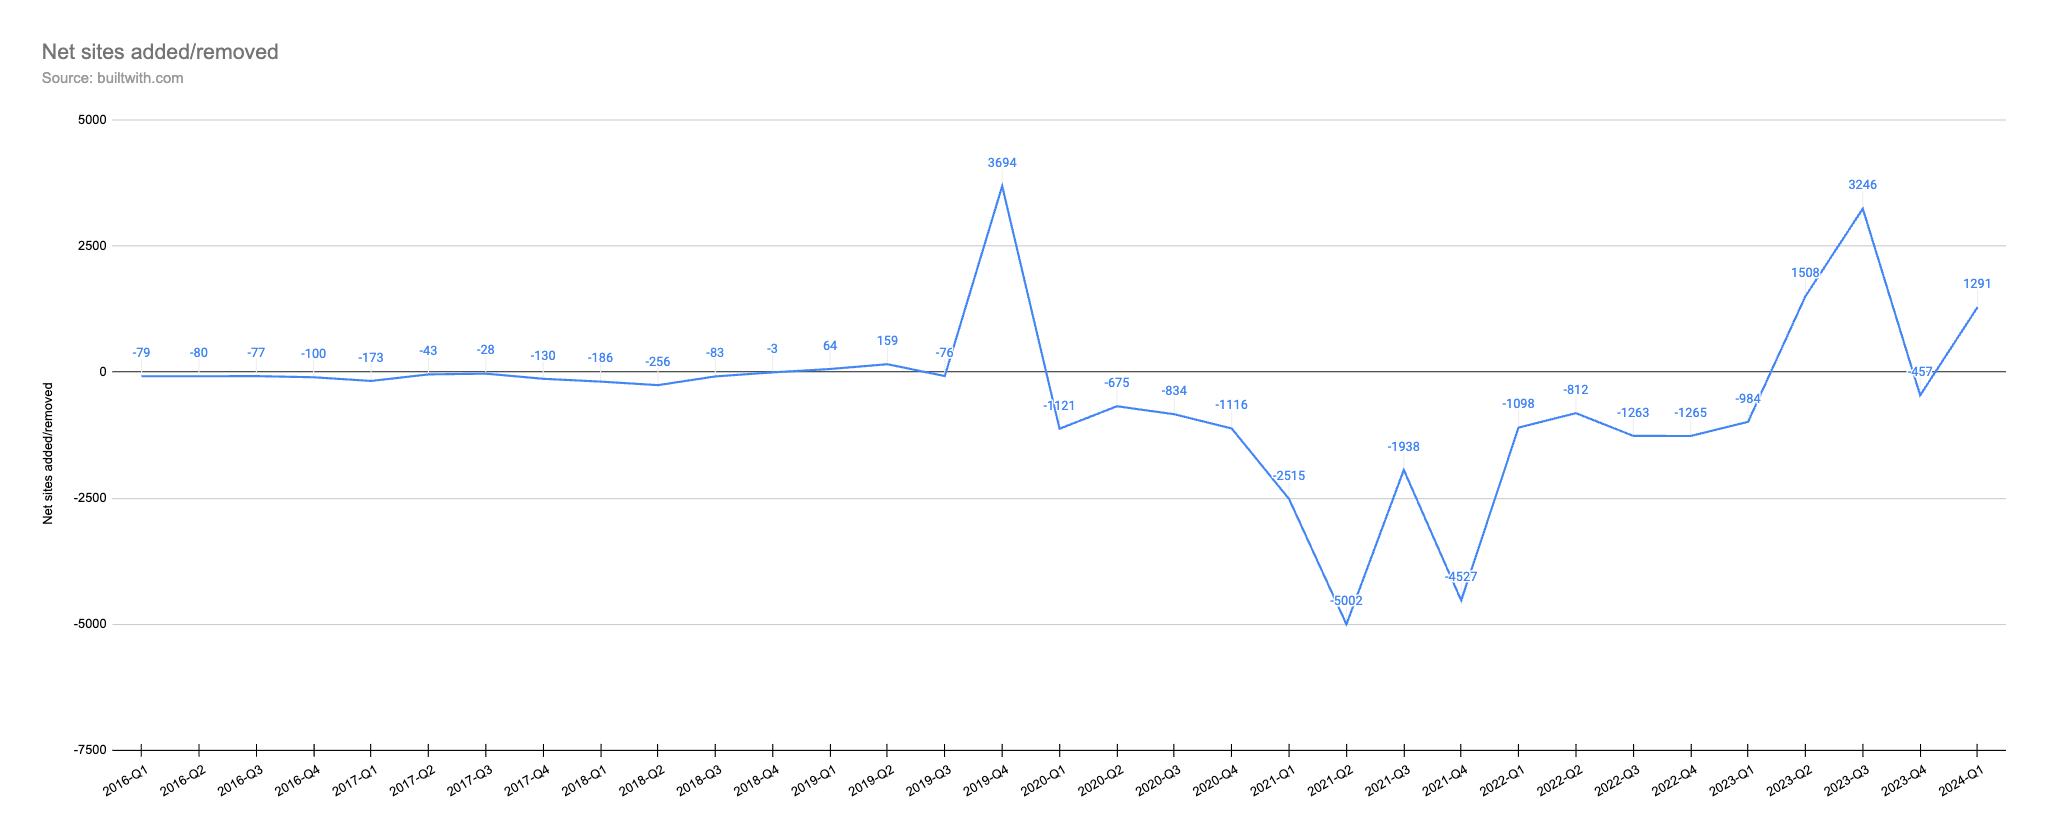 A screenshot showing the net sites that added and removed Mautic tracking over time. There's a large negative drop between Q1 2020 and Q3 2023 but numbers are much stronger in the positive since then.